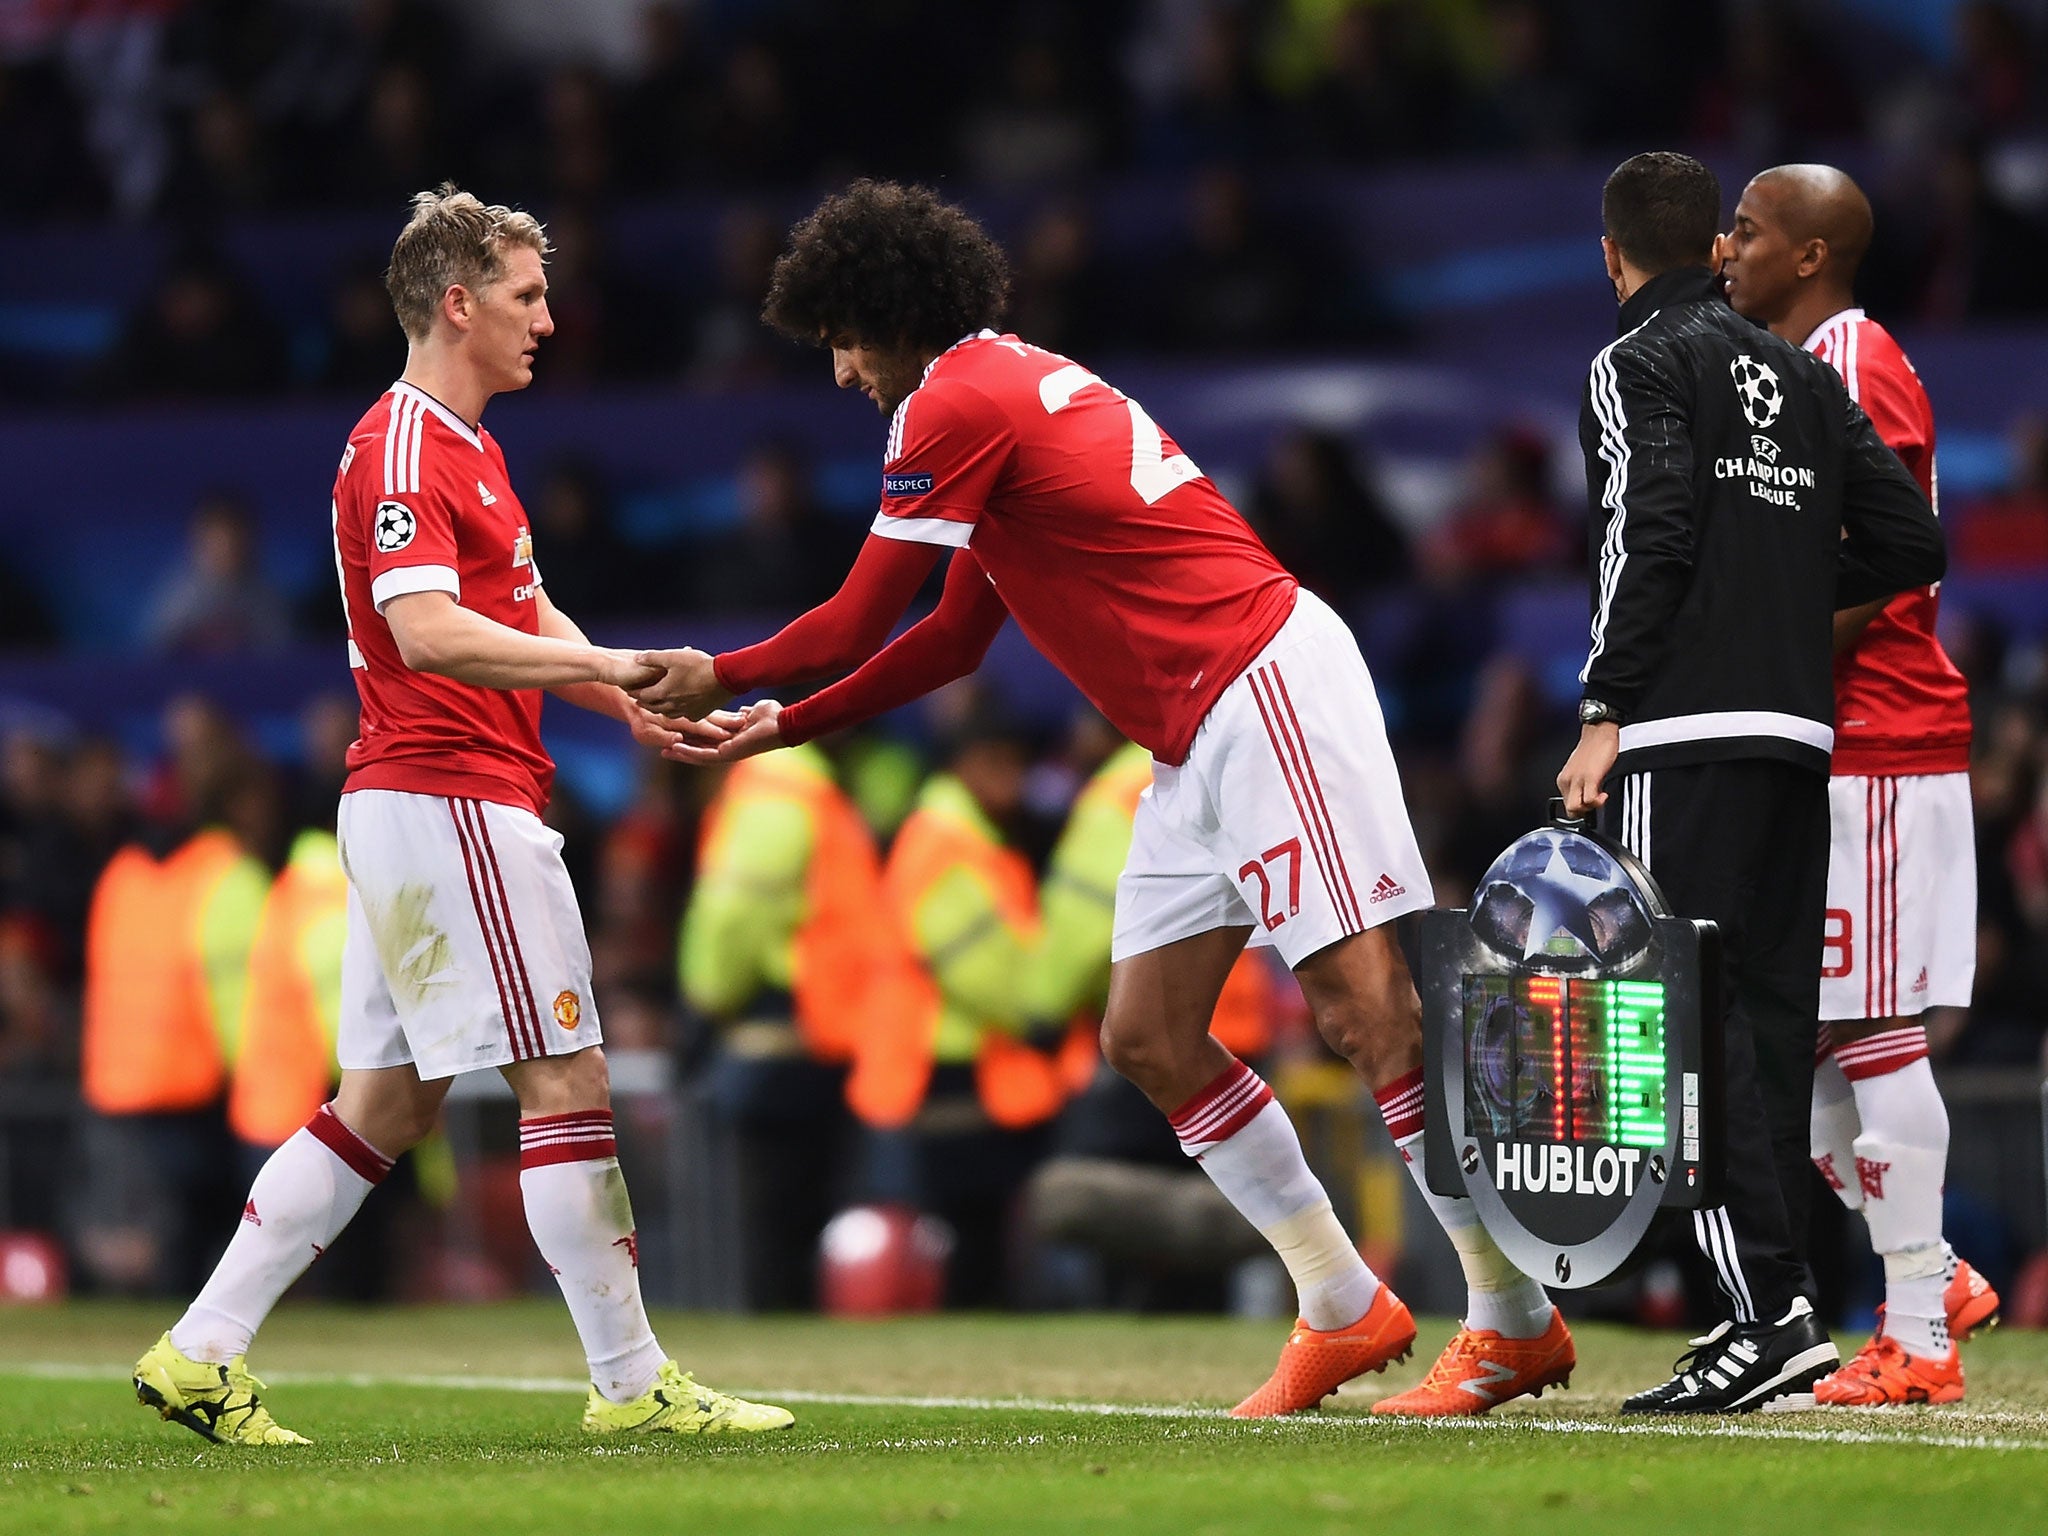 Bastian Schweinsteiger is replaced by Marouane Fellaini after less than an hour